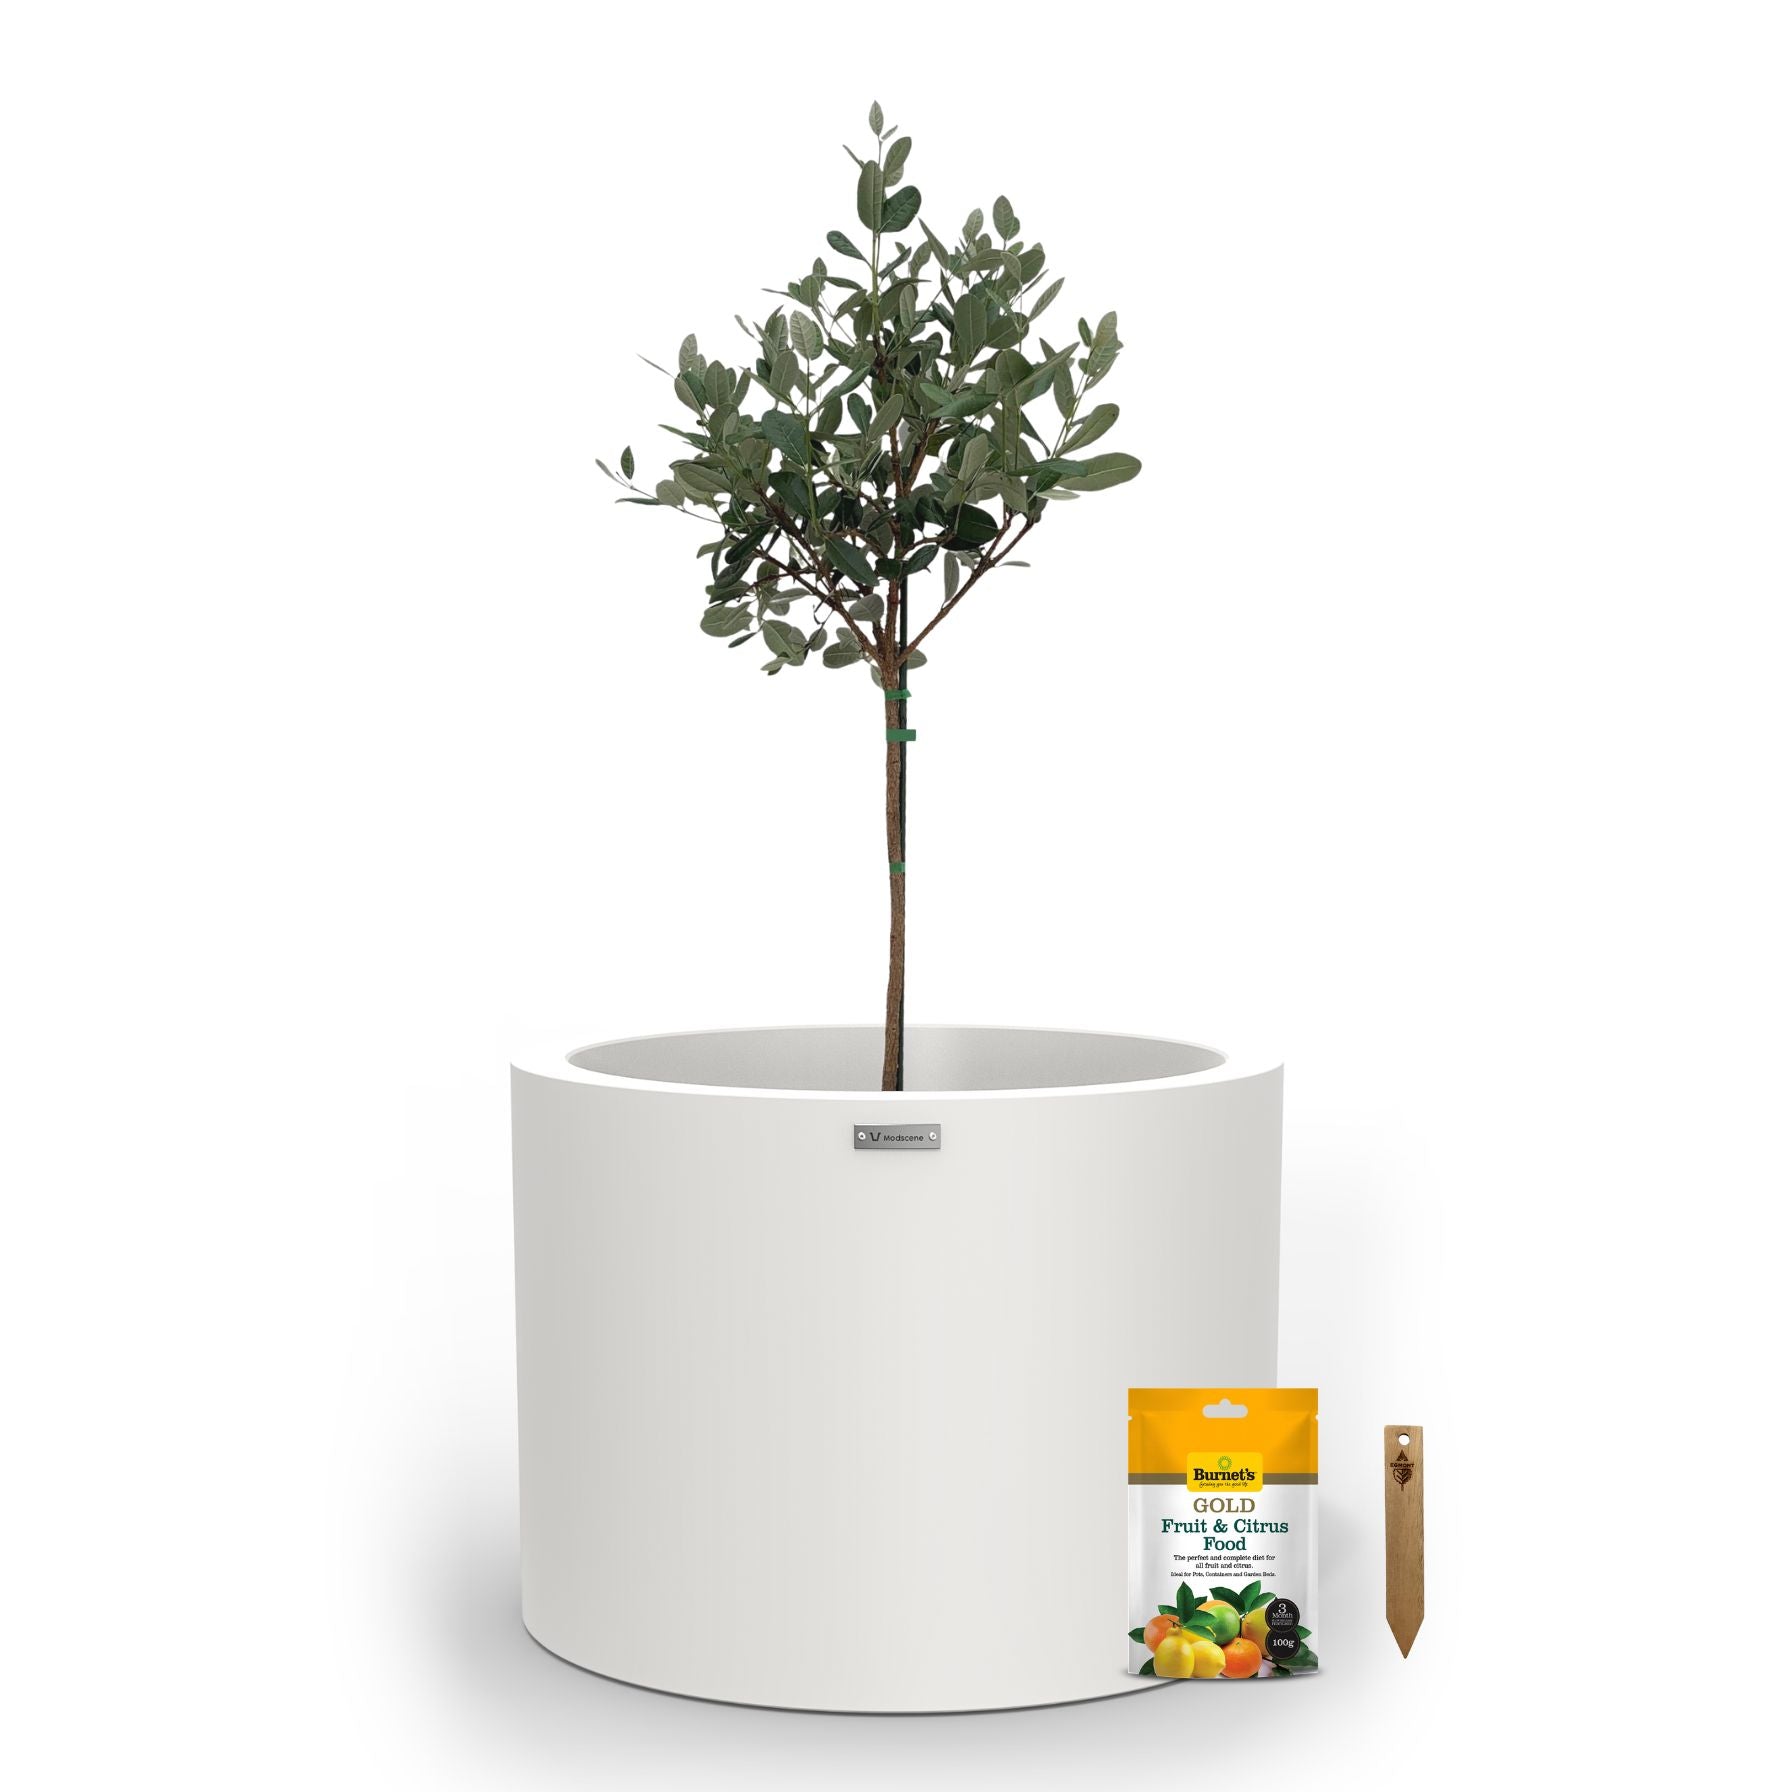 A large white planter pot used to plant fruit trees. 